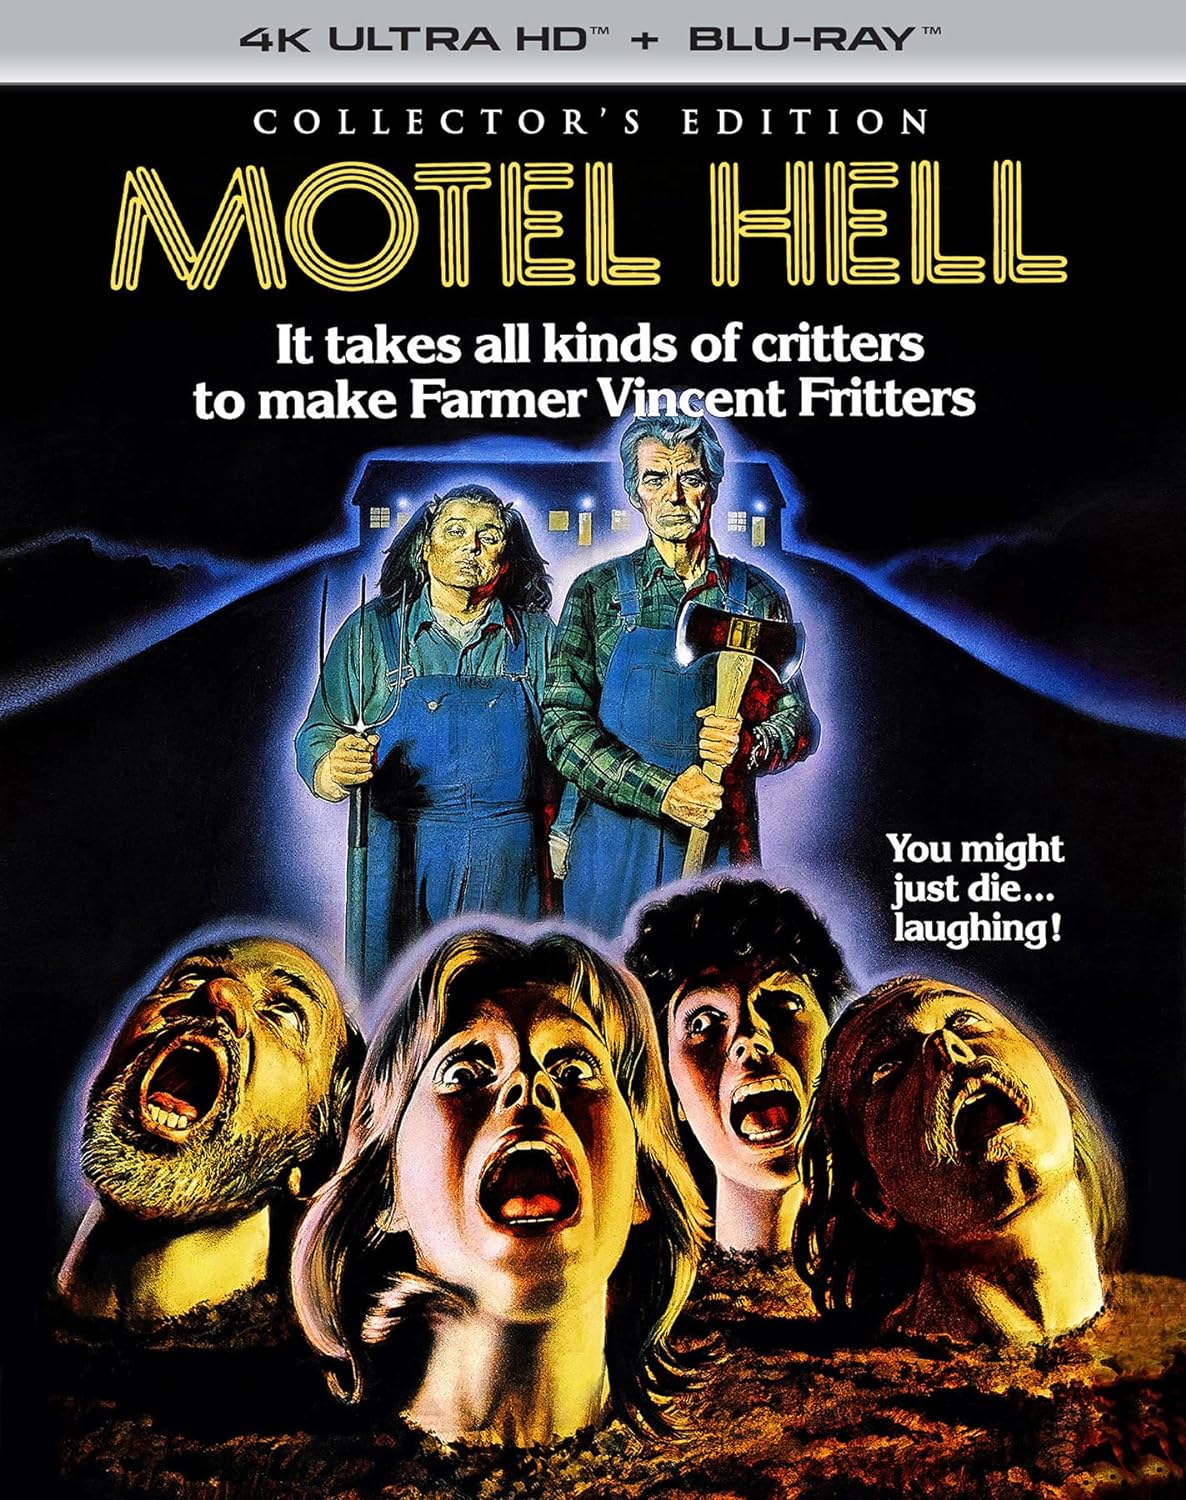 Motel Hell: Collector's Edition (1980, 4K Ultra HD + Blu-ray)